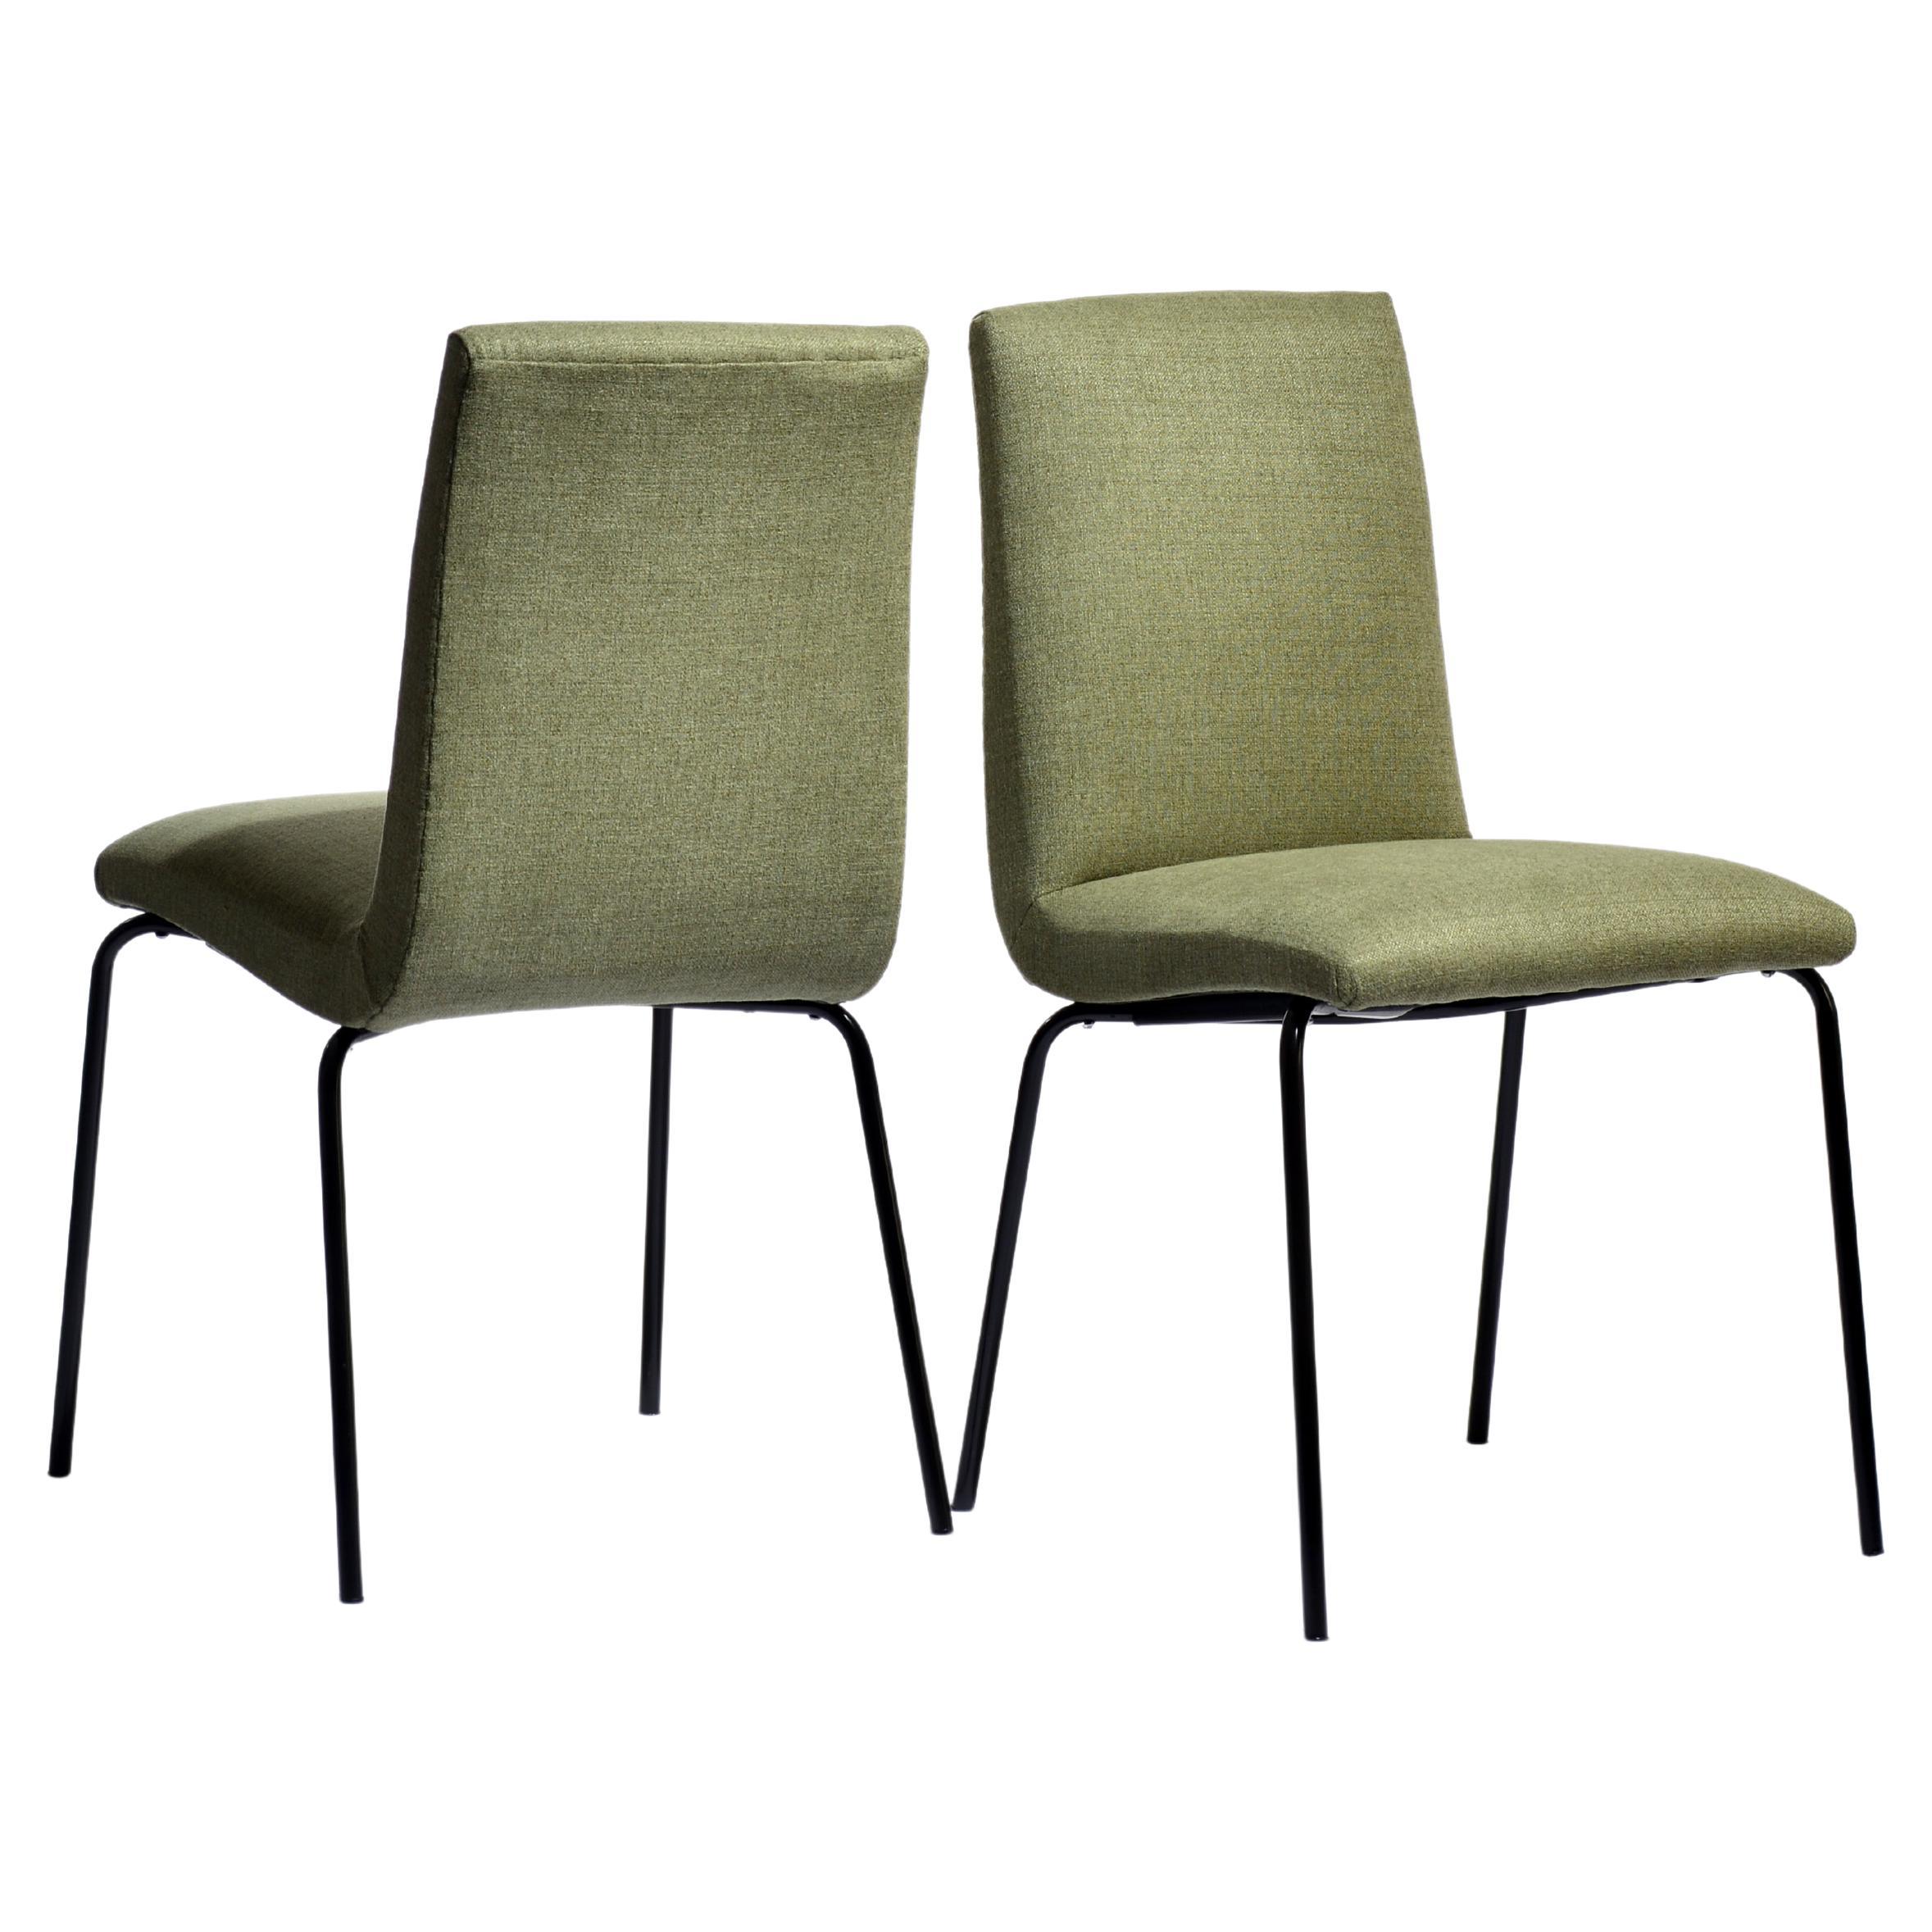 Couple of Chairs Designed by Pierre Guariche for Meurop